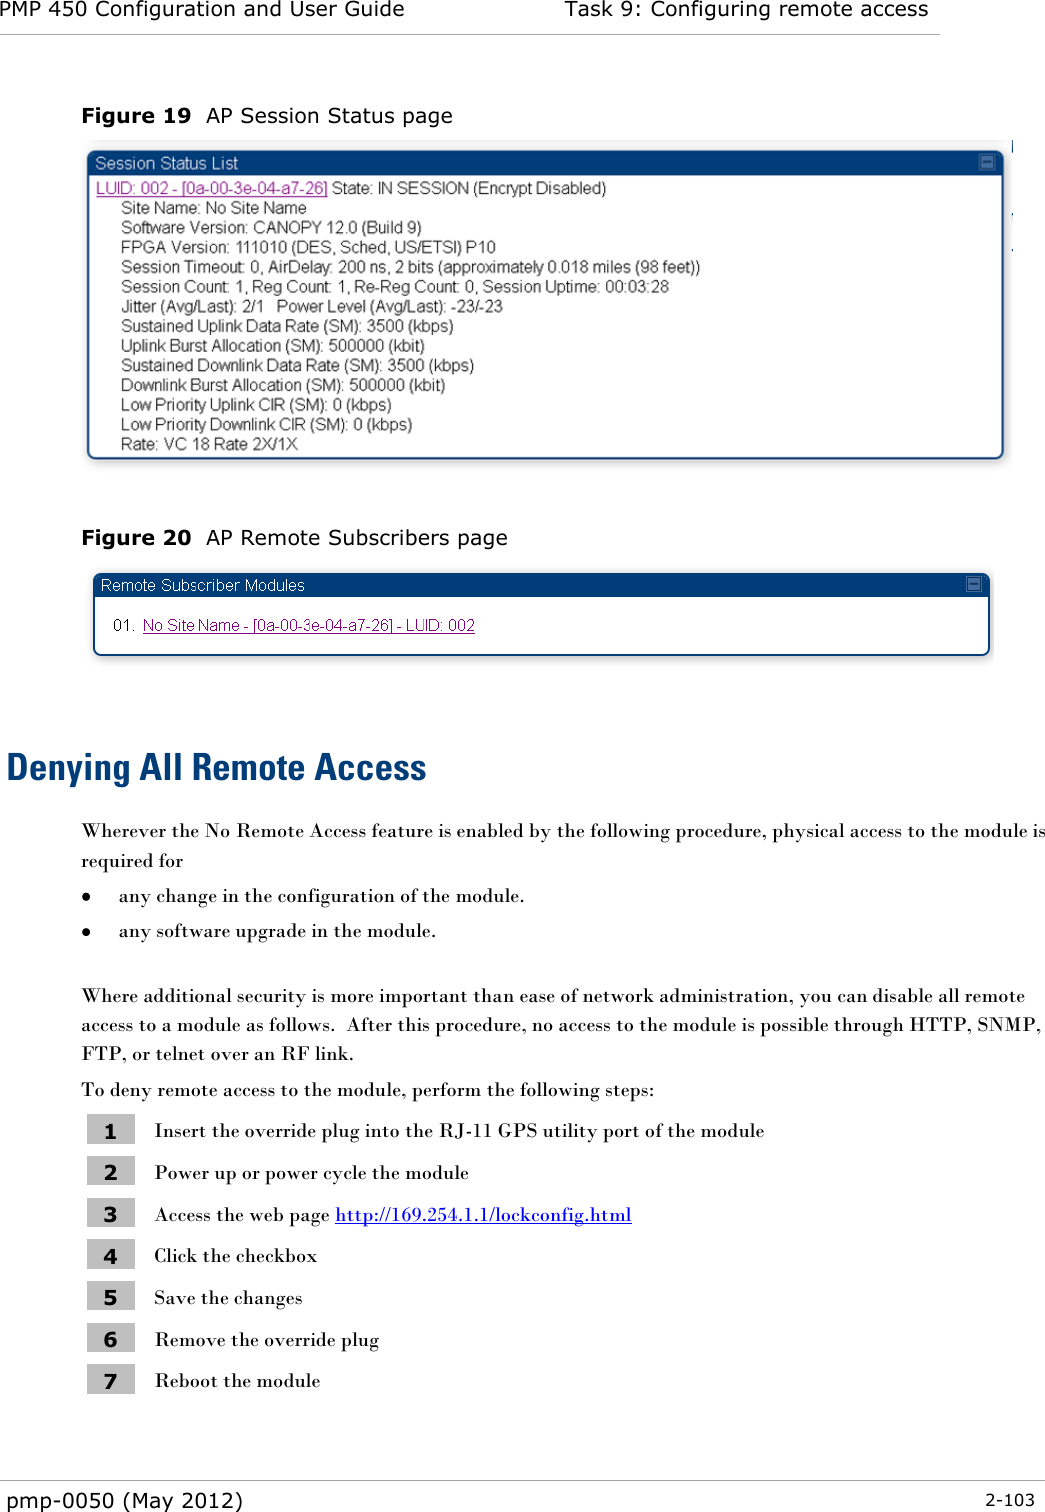 PMP 450 Configuration and User Guide Task 9: Configuring remote access  pmp-0050 (May 2012)  2-103  Figure 19  AP Session Status page   Figure 20  AP Remote Subscribers page   Denying All Remote Access Wherever the No Remote Access feature is enabled by the following procedure, physical access to the module is required for   any change in the configuration of the module.  any software upgrade in the module.  Where additional security is more important than ease of network administration, you can disable all remote access to a module as follows.  After this procedure, no access to the module is possible through HTTP, SNMP, FTP, or telnet over an RF link. To deny remote access to the module, perform the following steps: 1 Insert the override plug into the RJ-11 GPS utility port of the module 2 Power up or power cycle the module 3 Access the web page http://169.254.1.1/lockconfig.html 4 Click the checkbox 5 Save the changes 6 Remove the override plug 7 Reboot the module  